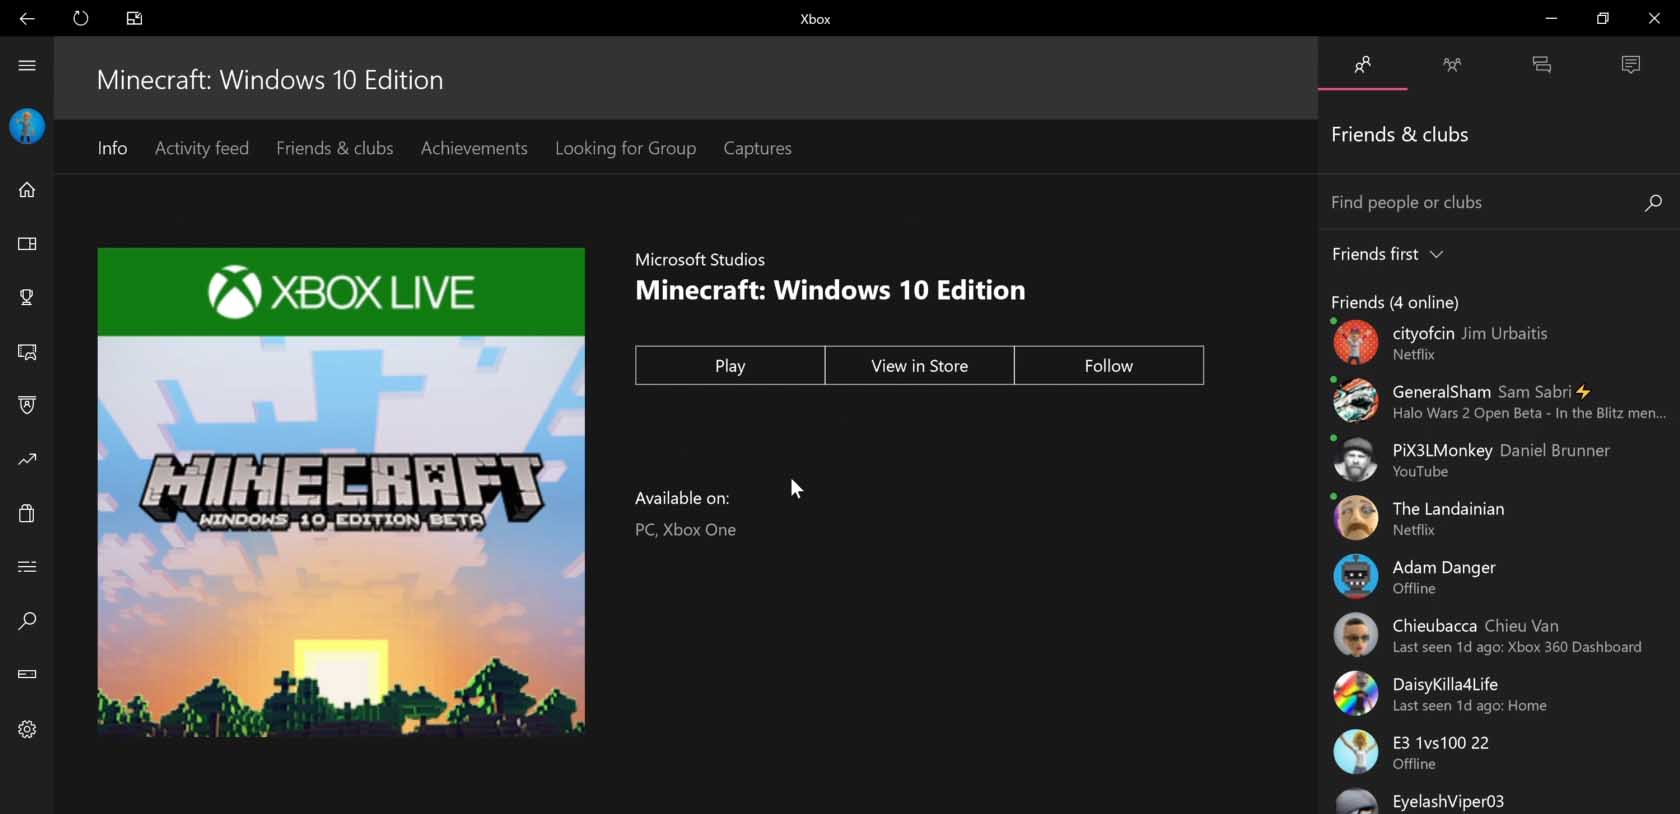 Windows 10 Tip: Three tips for on-the-go gaming with the Xbox app